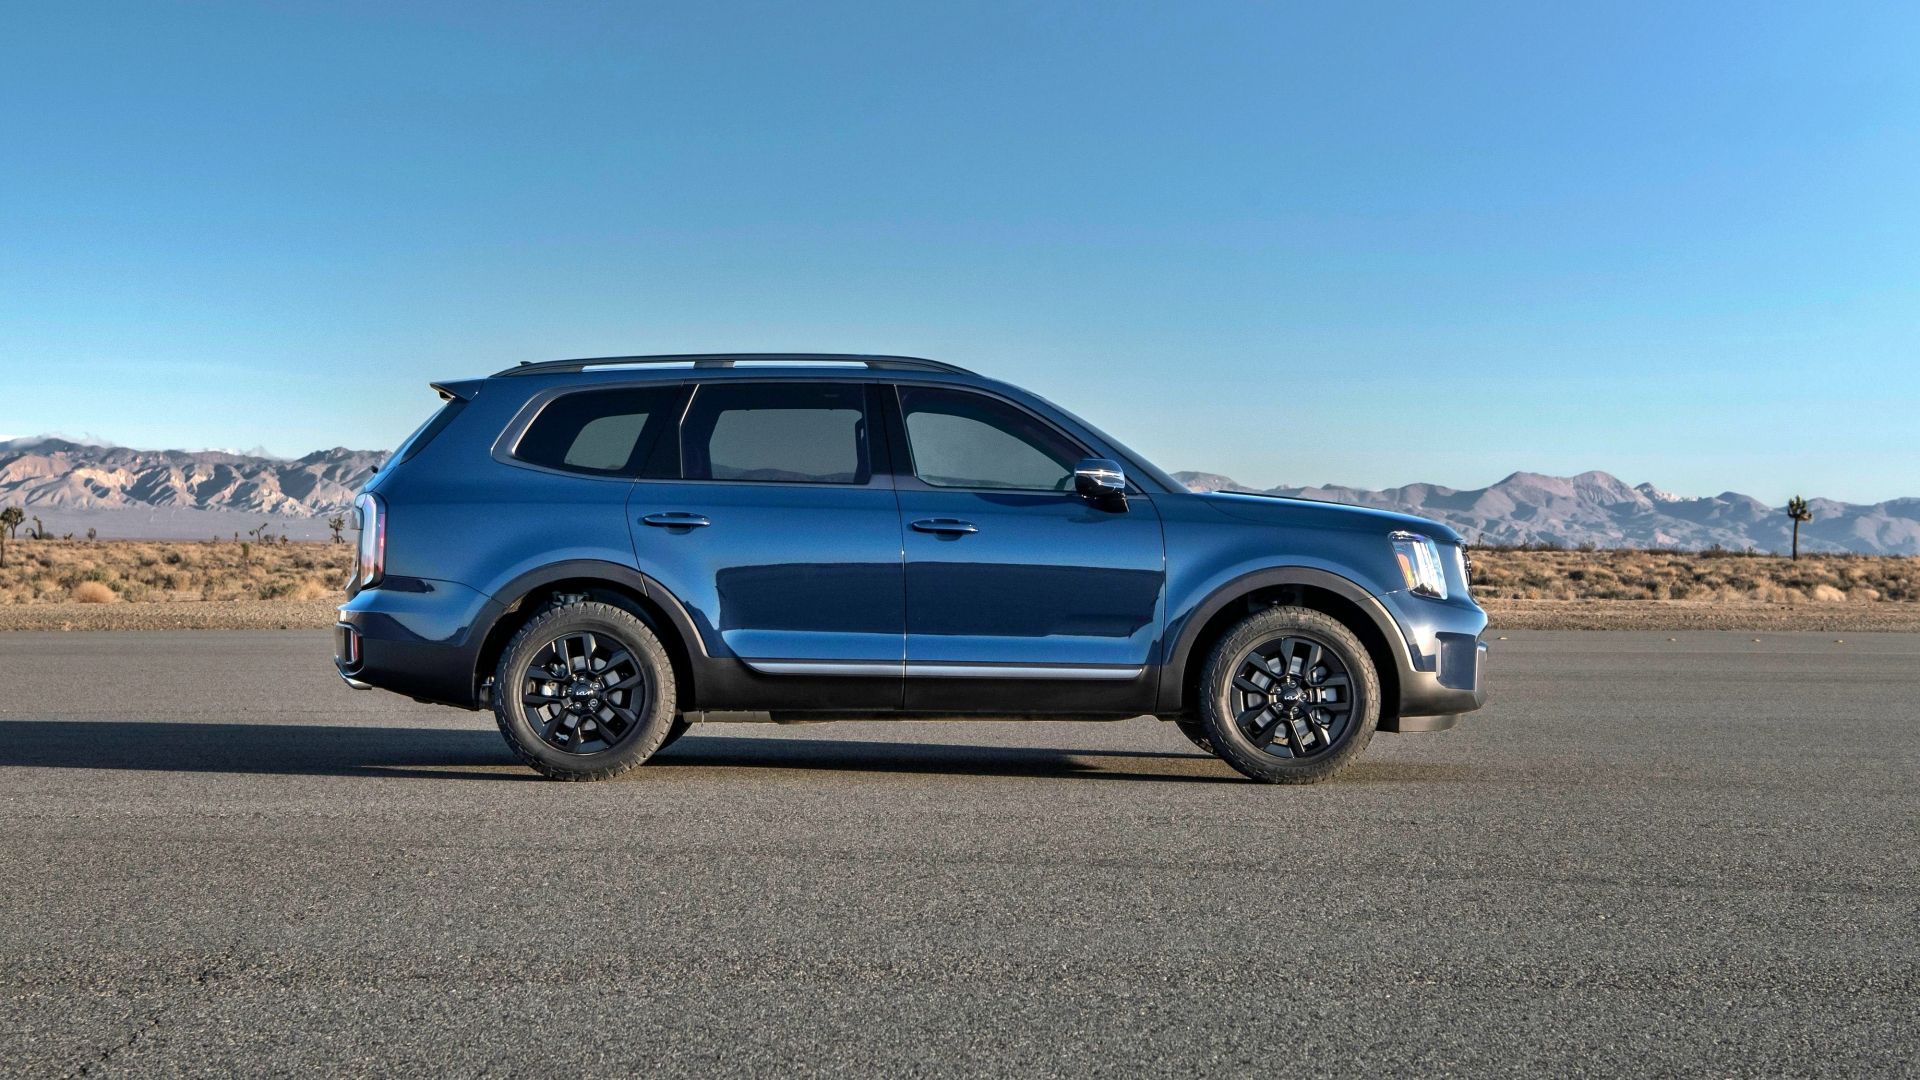 A blue Kia Telluride from the side